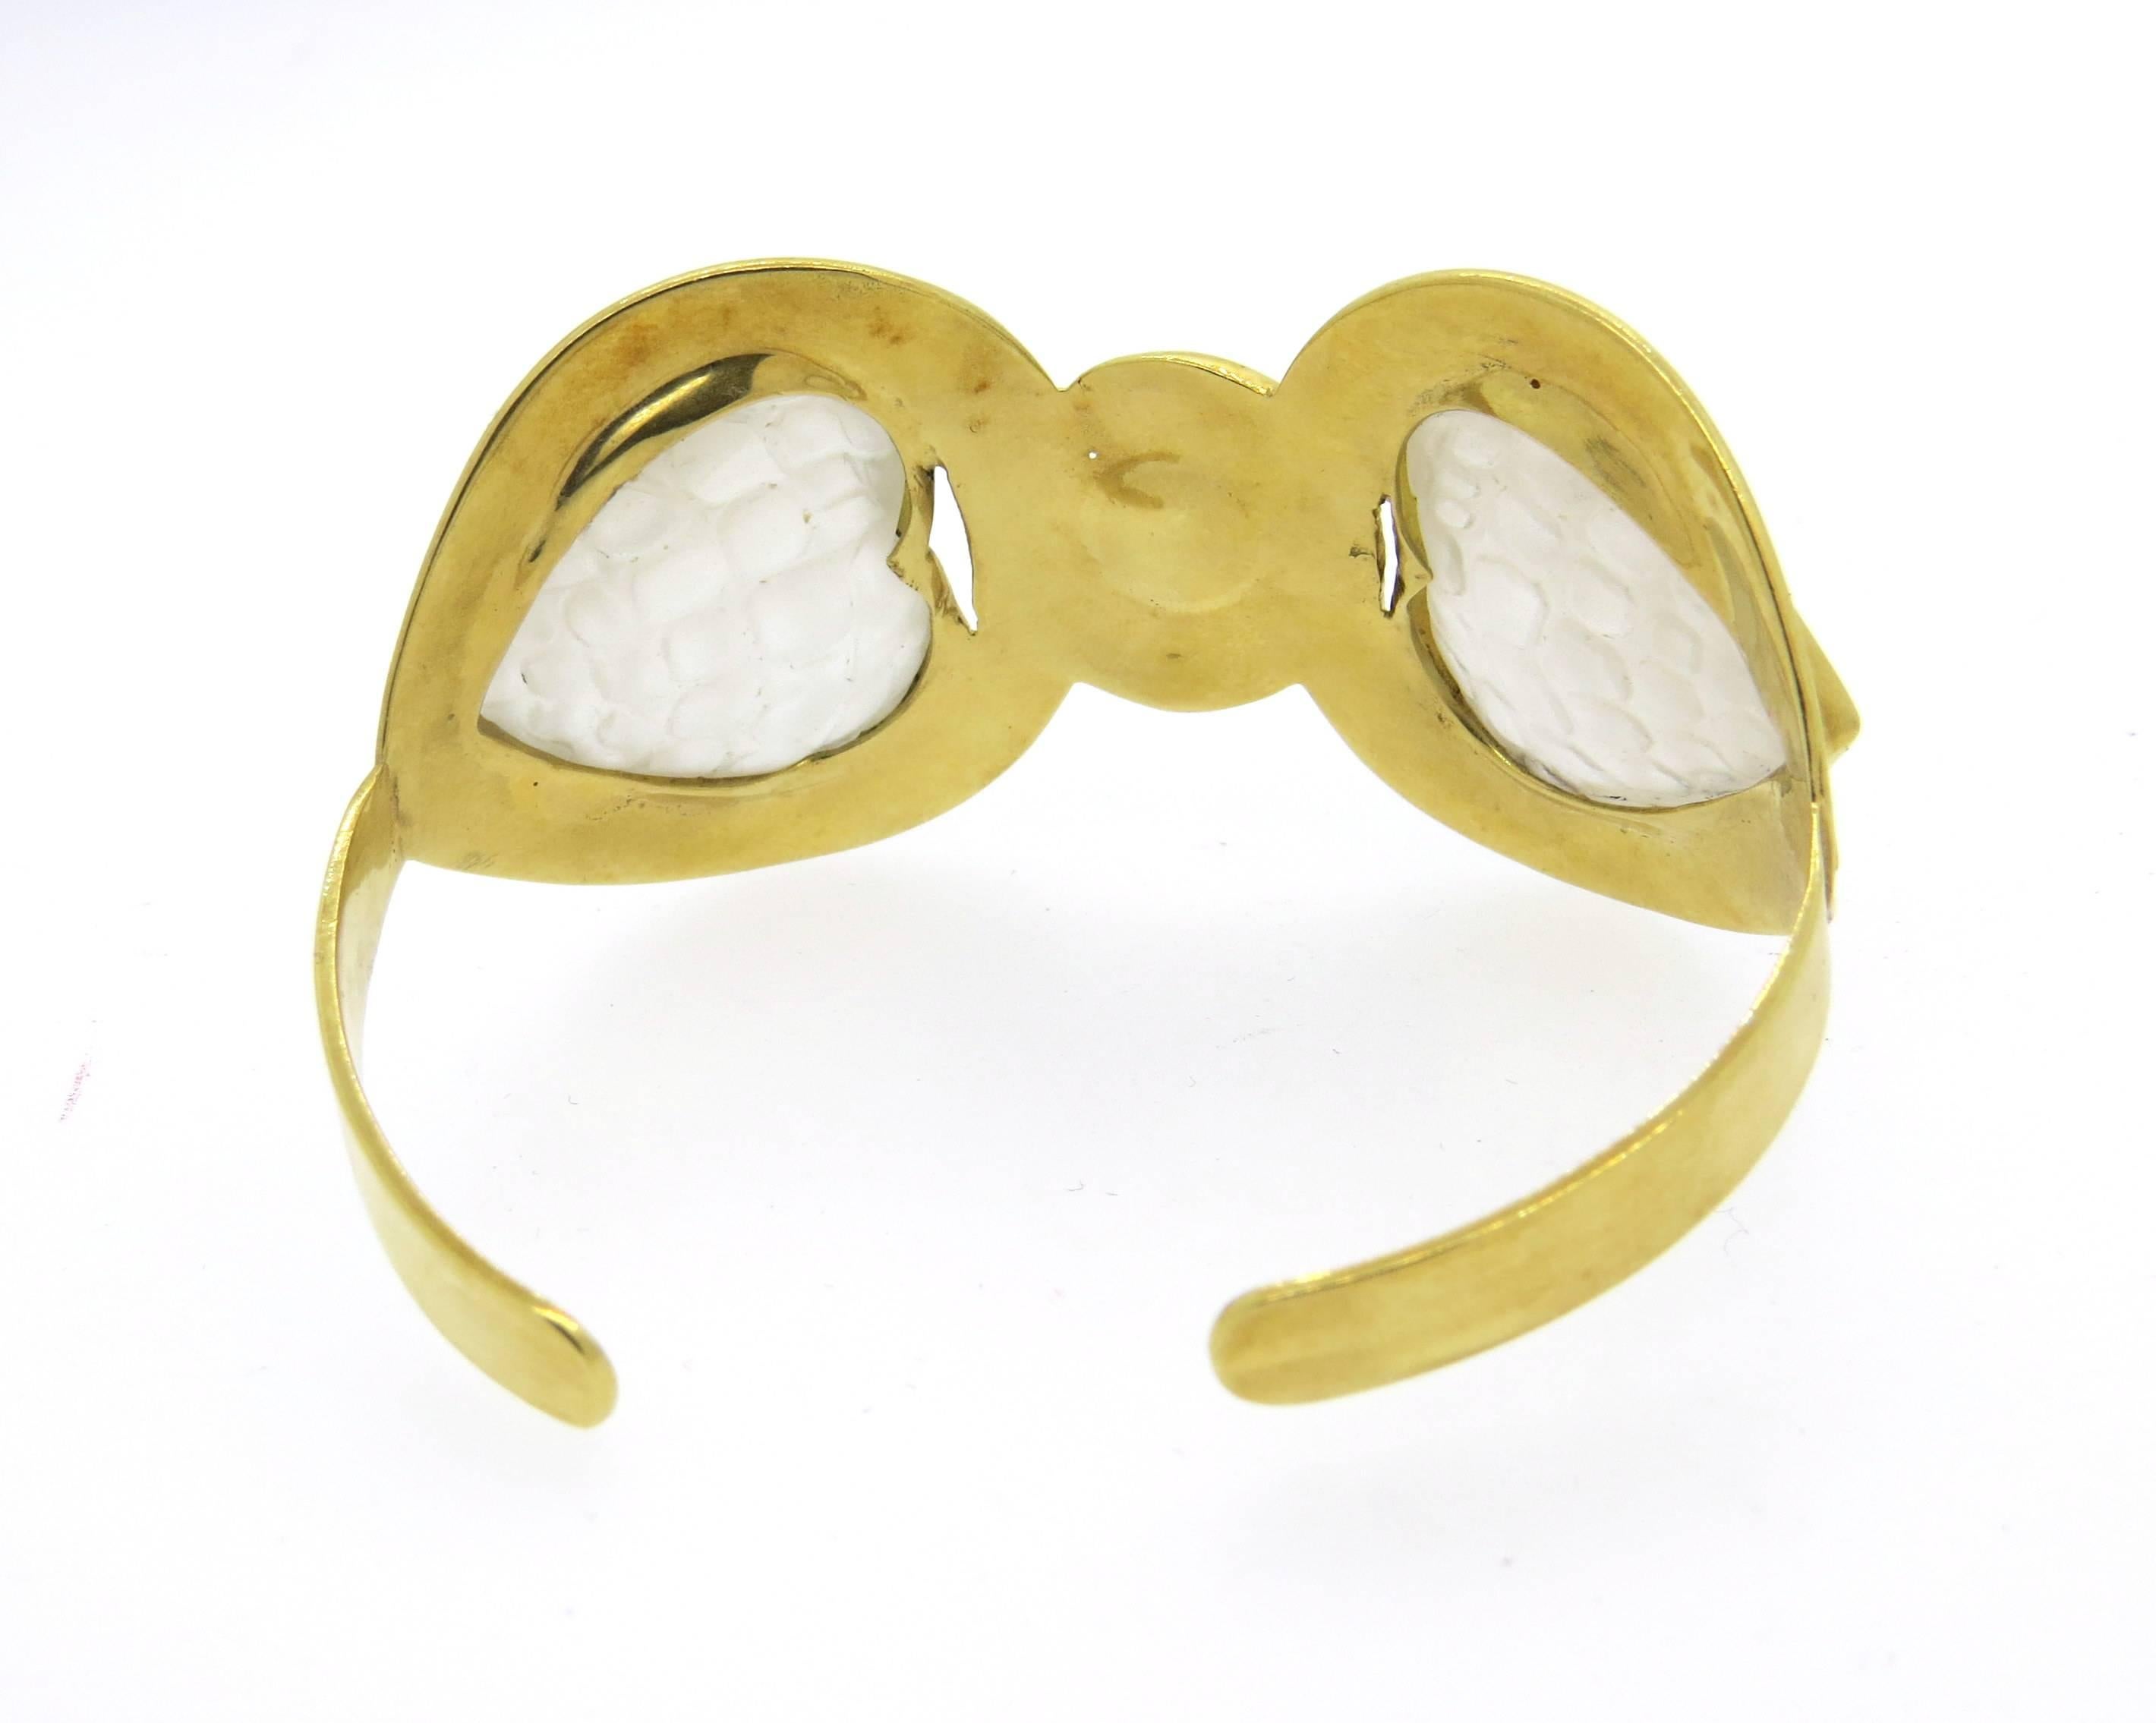 18k yellow gold cuff bracelet, decorated with frosted crystals. Bracelet will fit up to 7